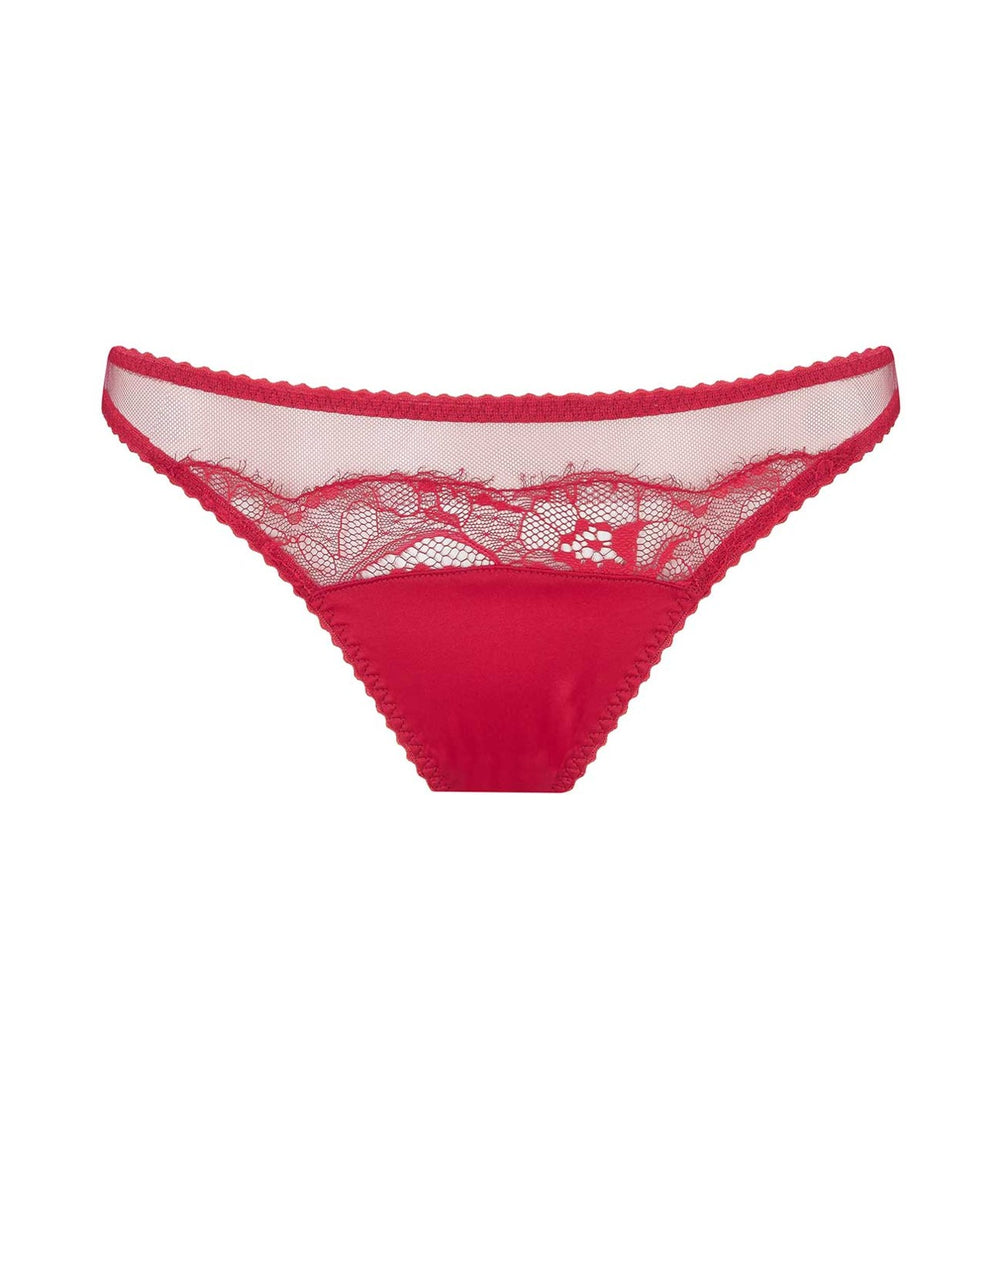 Fleur of England Adeline Red Lace Brief